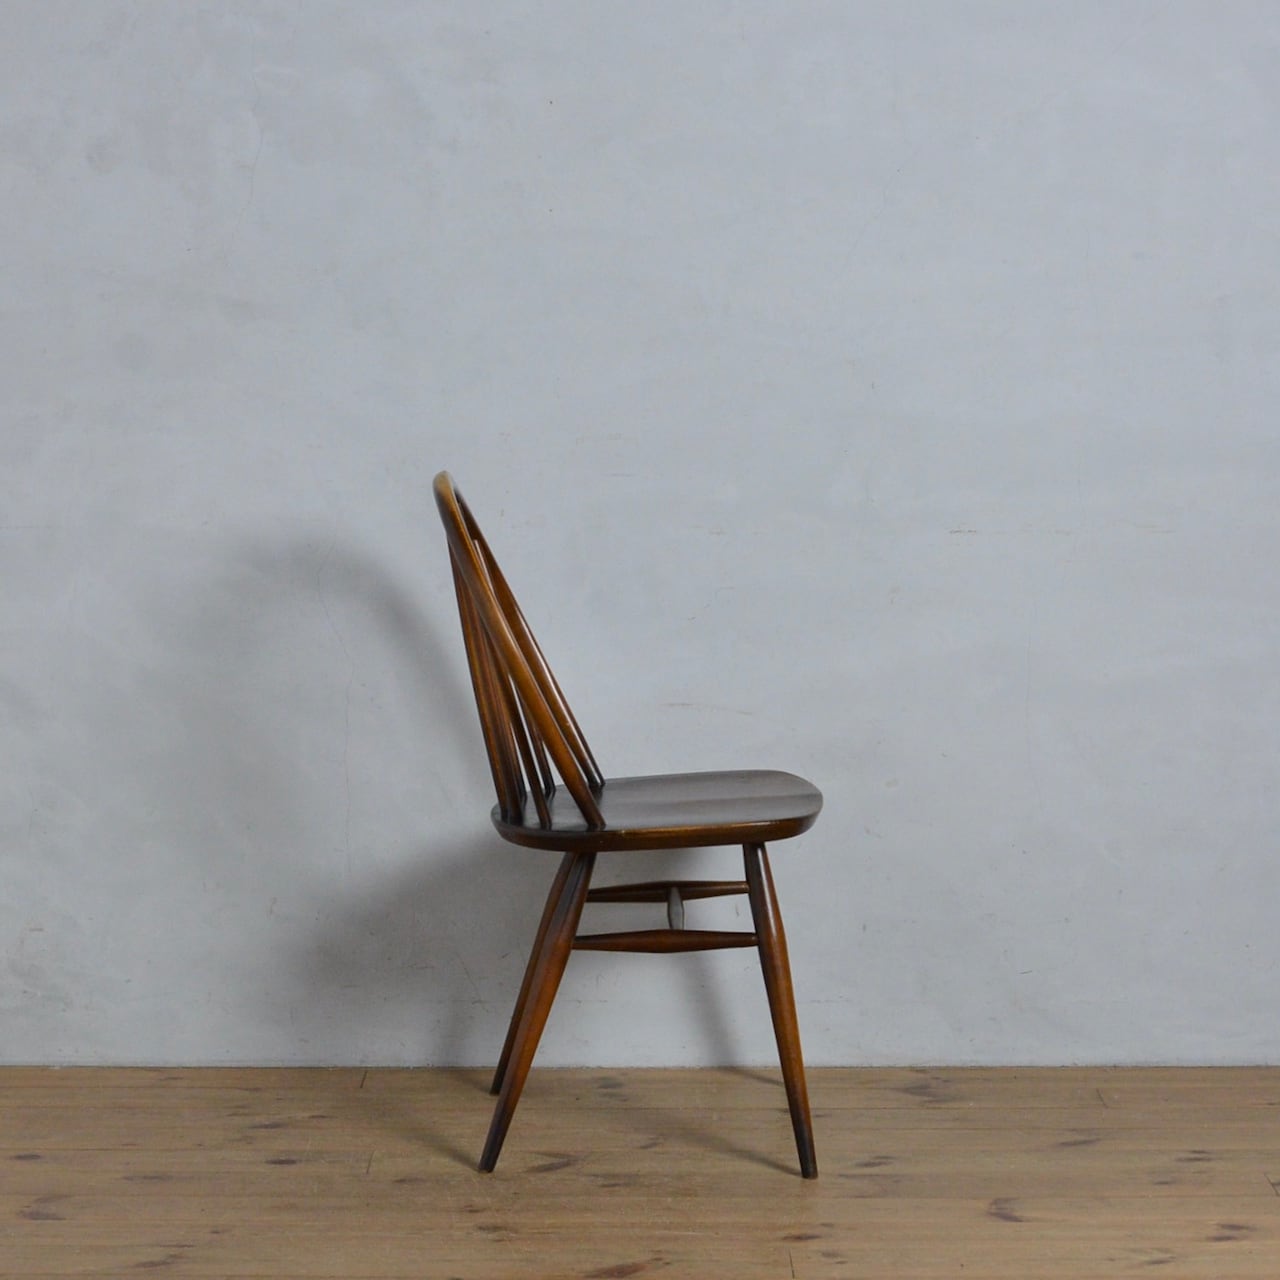 Ercol Hoopback Chair / アーコール フープバック チェア　 〈ダイニングチェア・デスクチェア・椅子・コロニアル・ウィンザーチェア〉   SHABBY'S MARKETPLACE　 アンティーク・ヴィンテージ 家具や雑貨のお店 powered by BASE